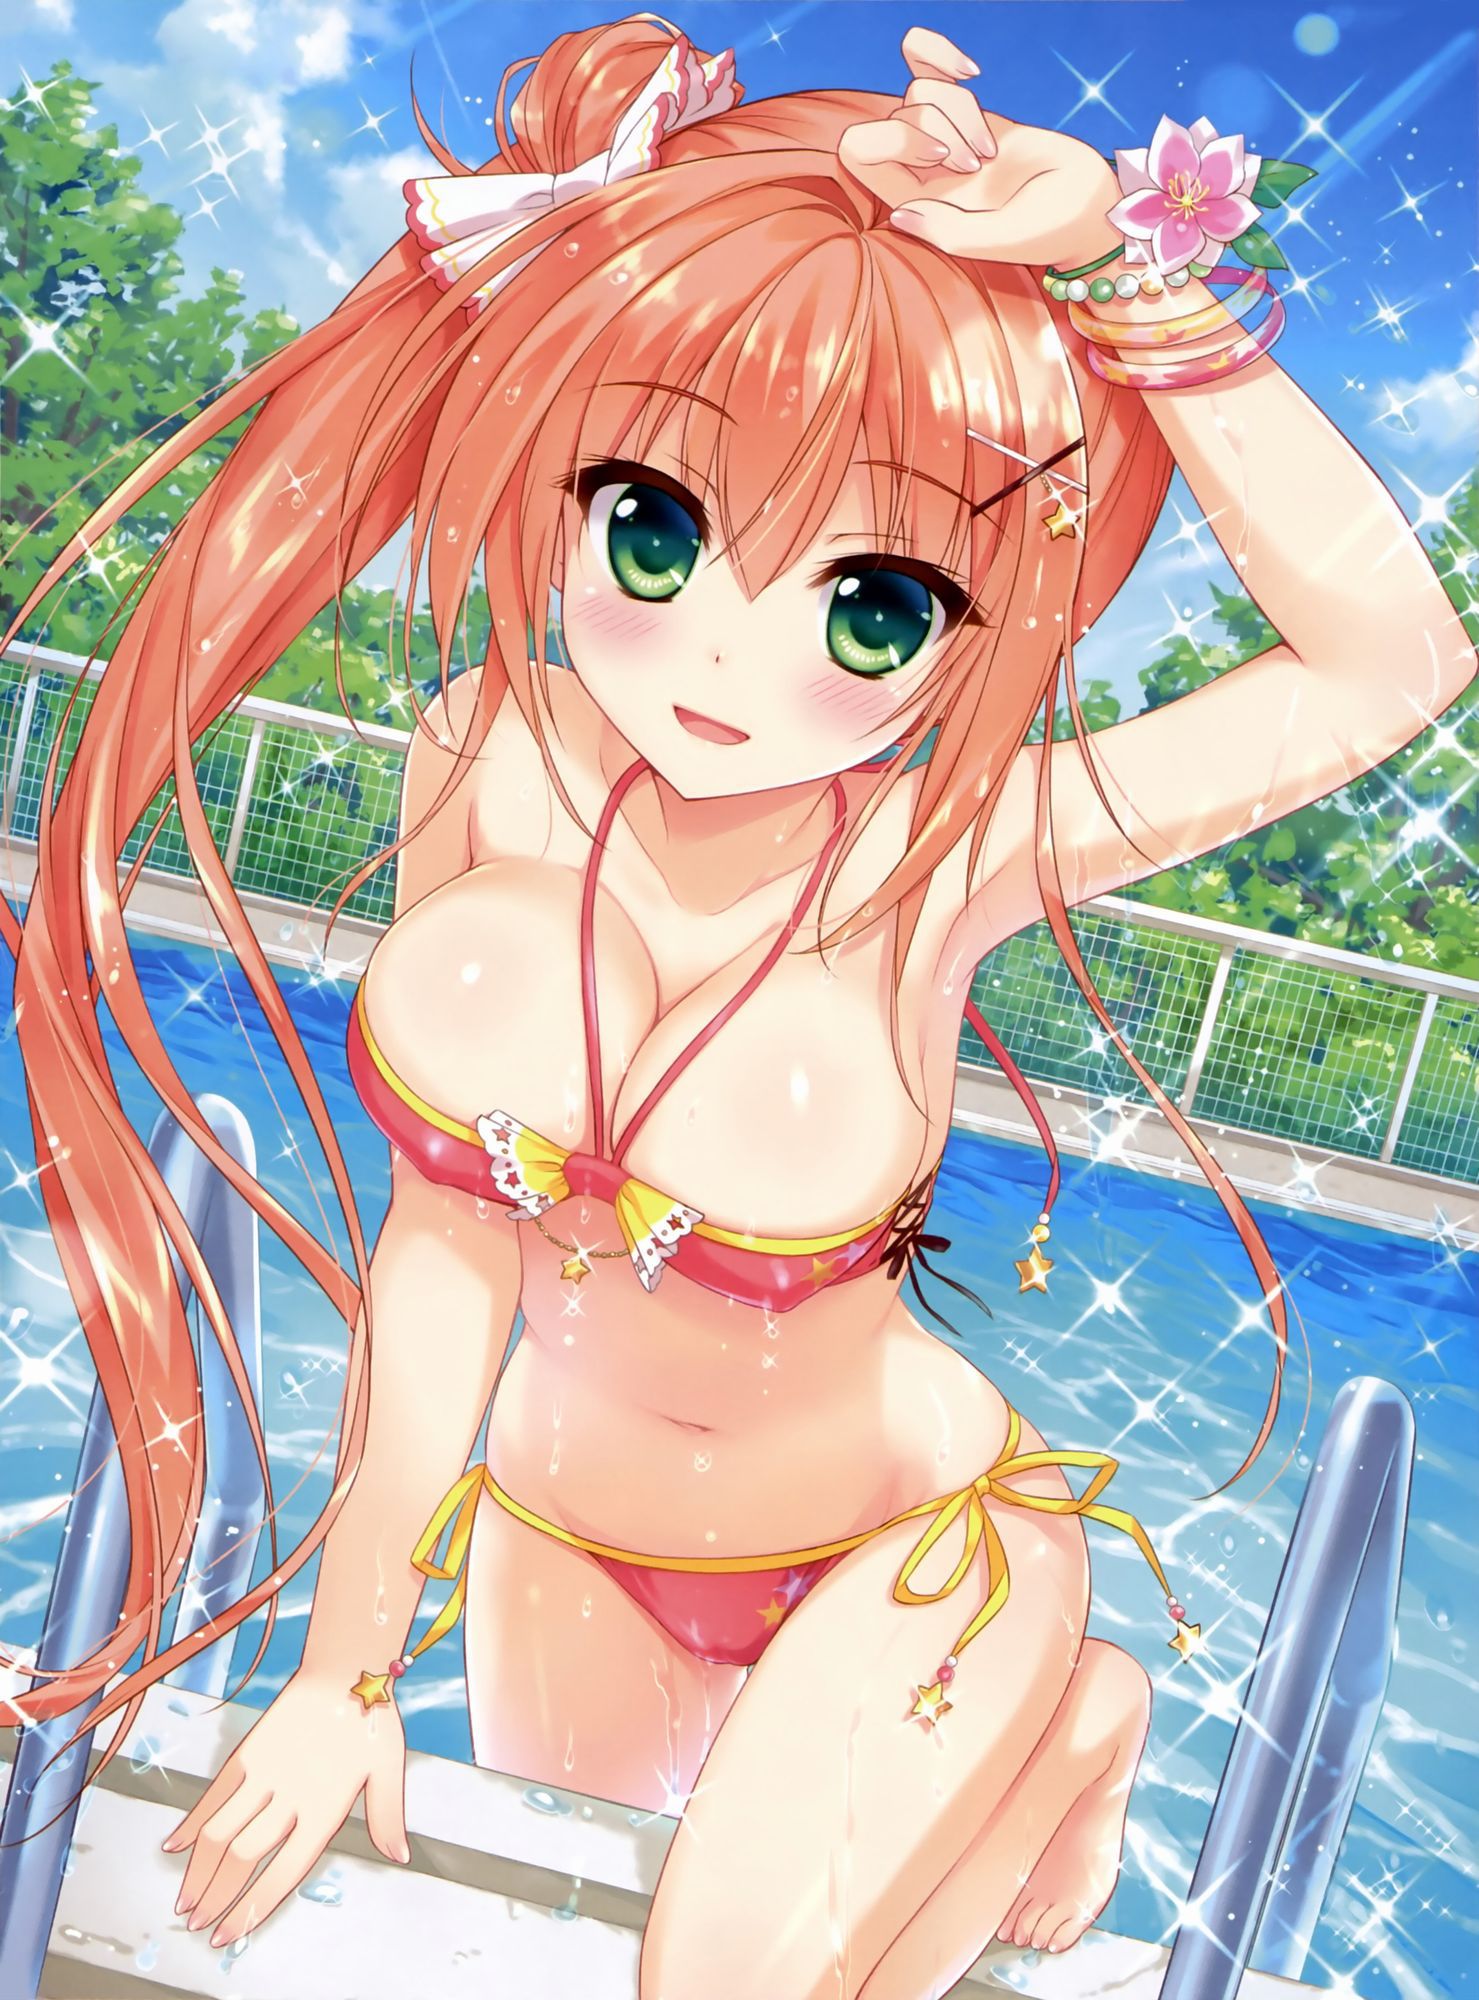 I want to see a swimsuit image. 2